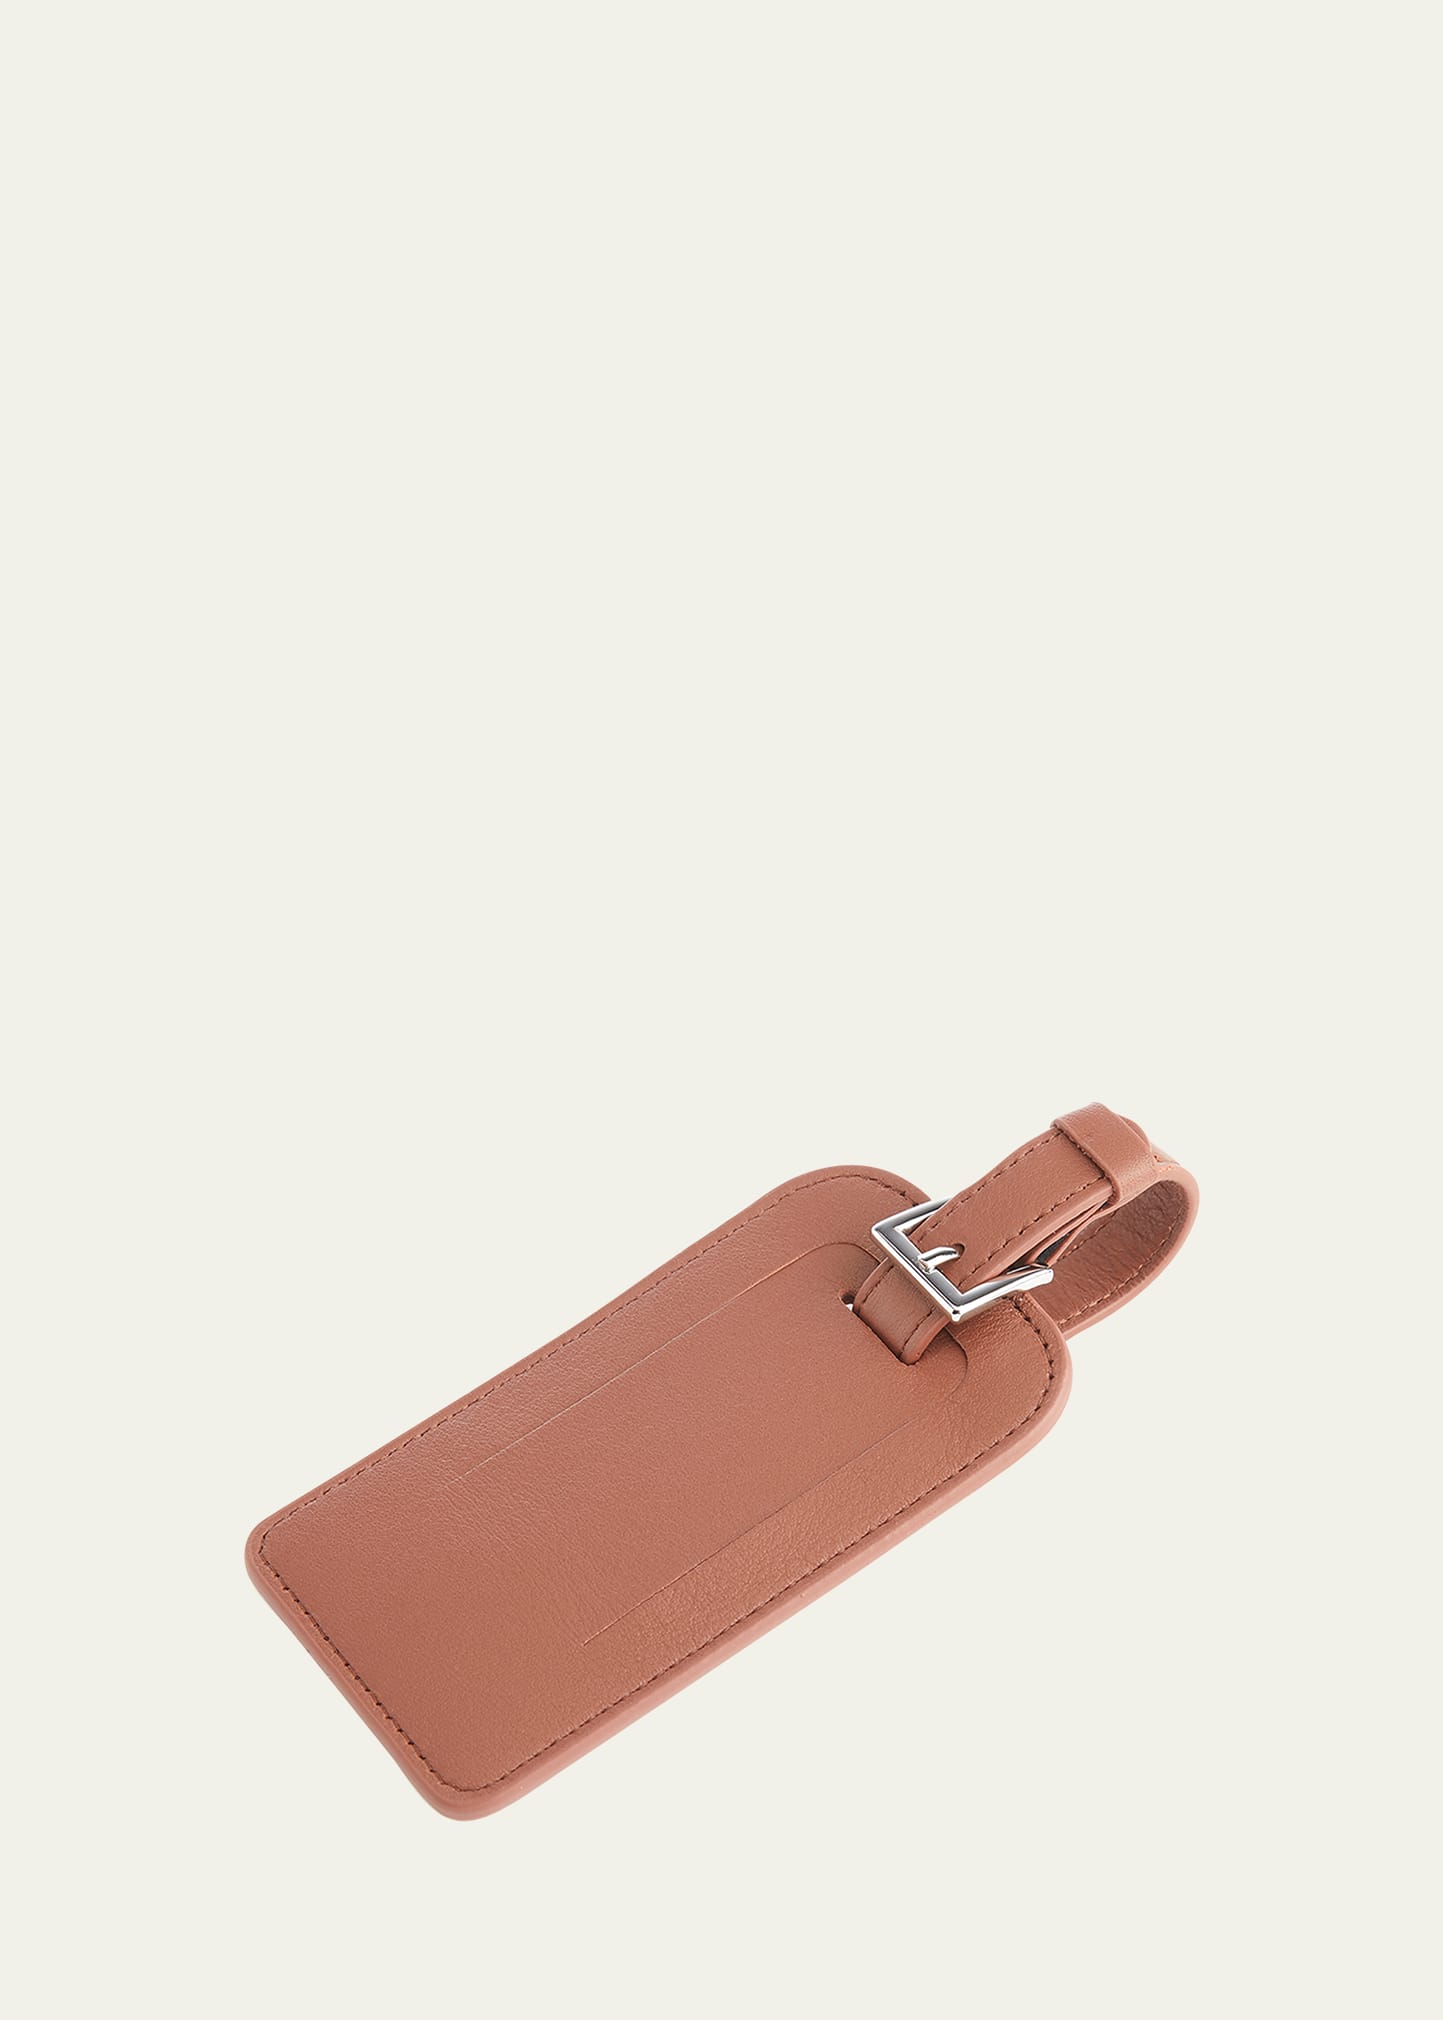 Royce New York Leather Luggage Tag With Silver Hardware In Tan